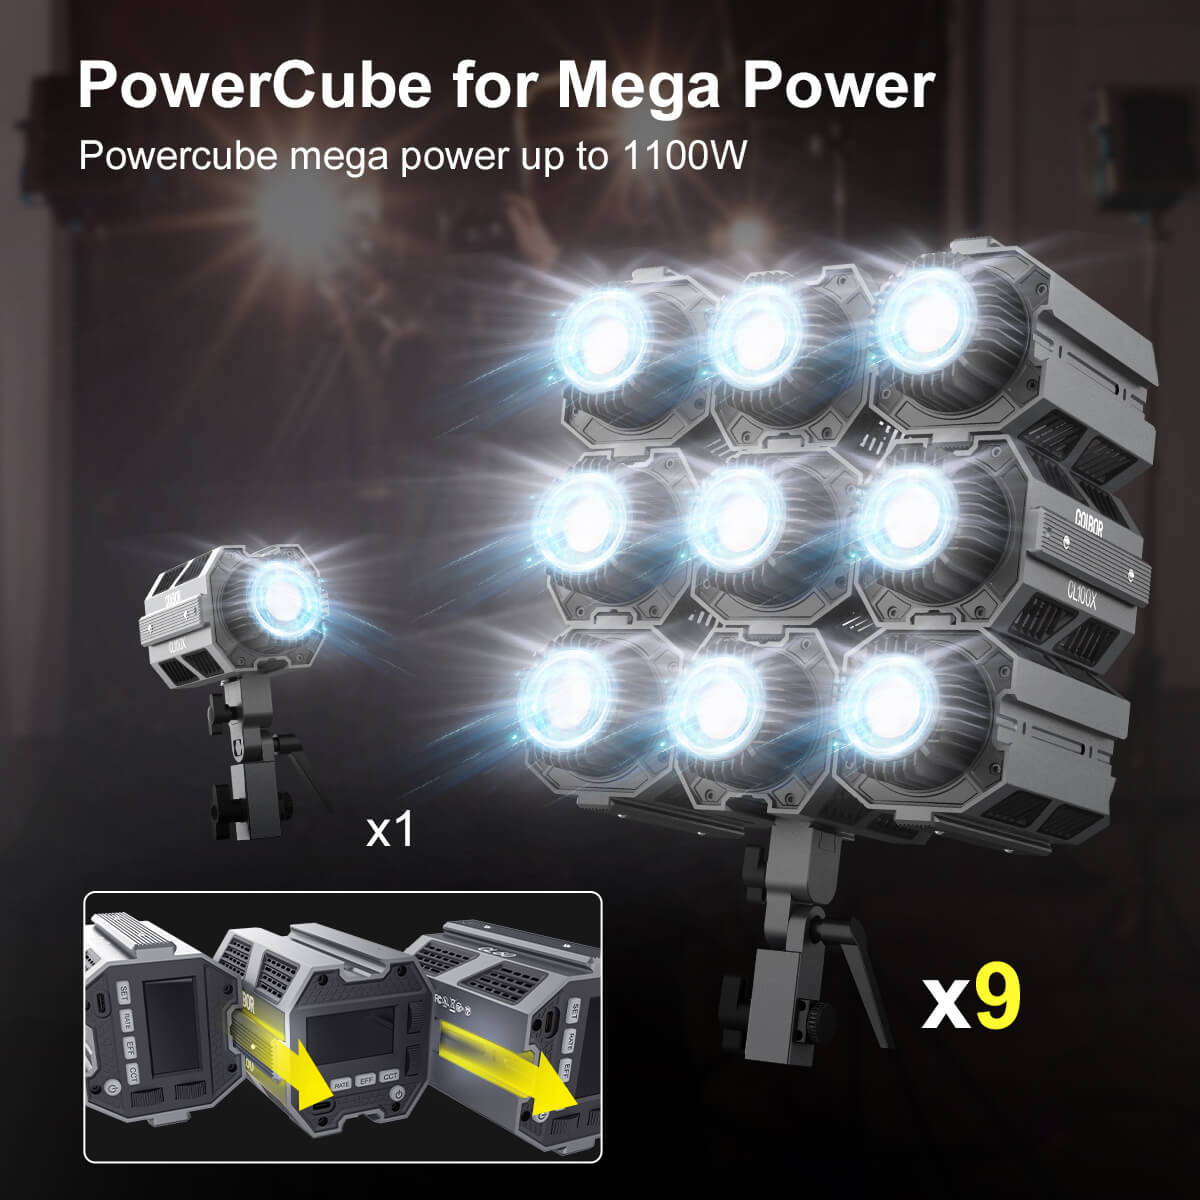 How to use studio lighting outdoors COLBOR CL100X is very easy. They can be assembled into a powercube with mega output.